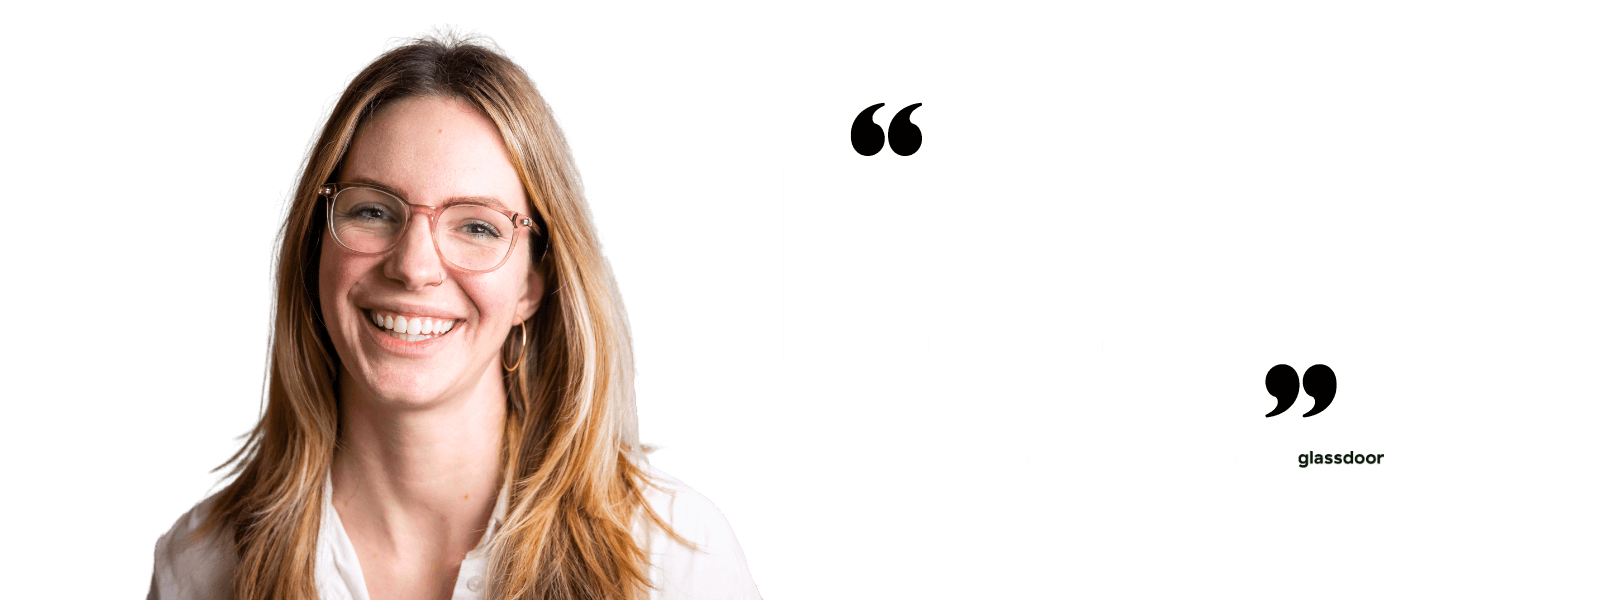 a headshot of a movementx physical therapist along with a quote that mentions how they enjoying working with other people at their job